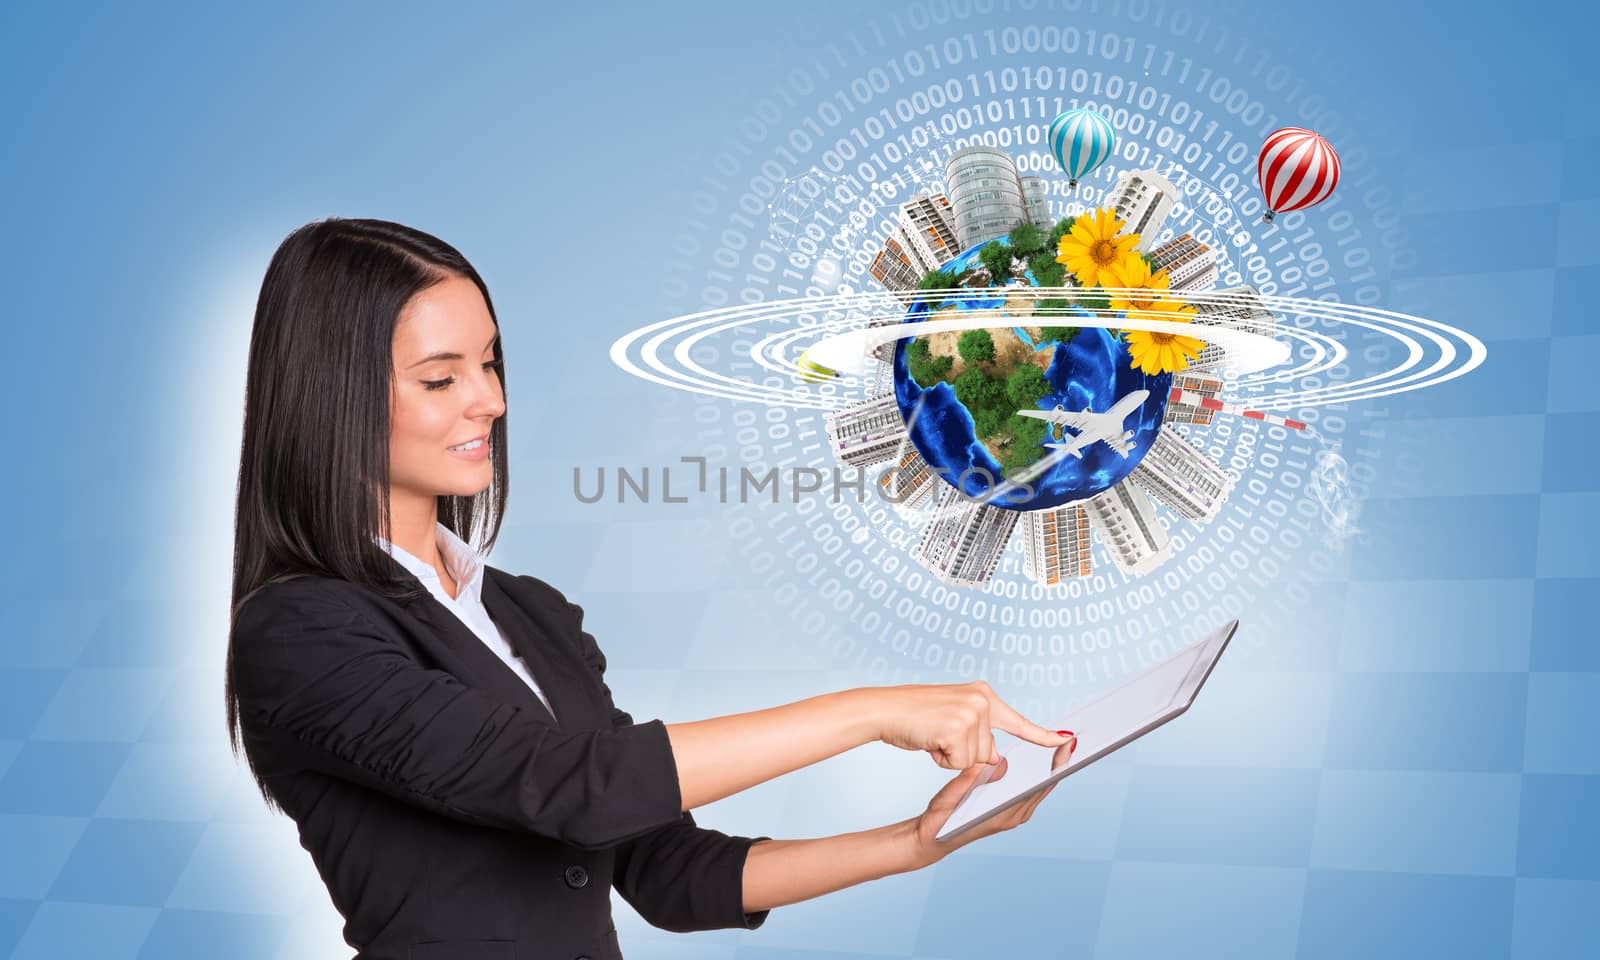 Beautiful businesswoman in suit using tablet. Earth with buildings, flowers, airplanes, air balloons and figures on blue background. Element of this image furnished by NASA